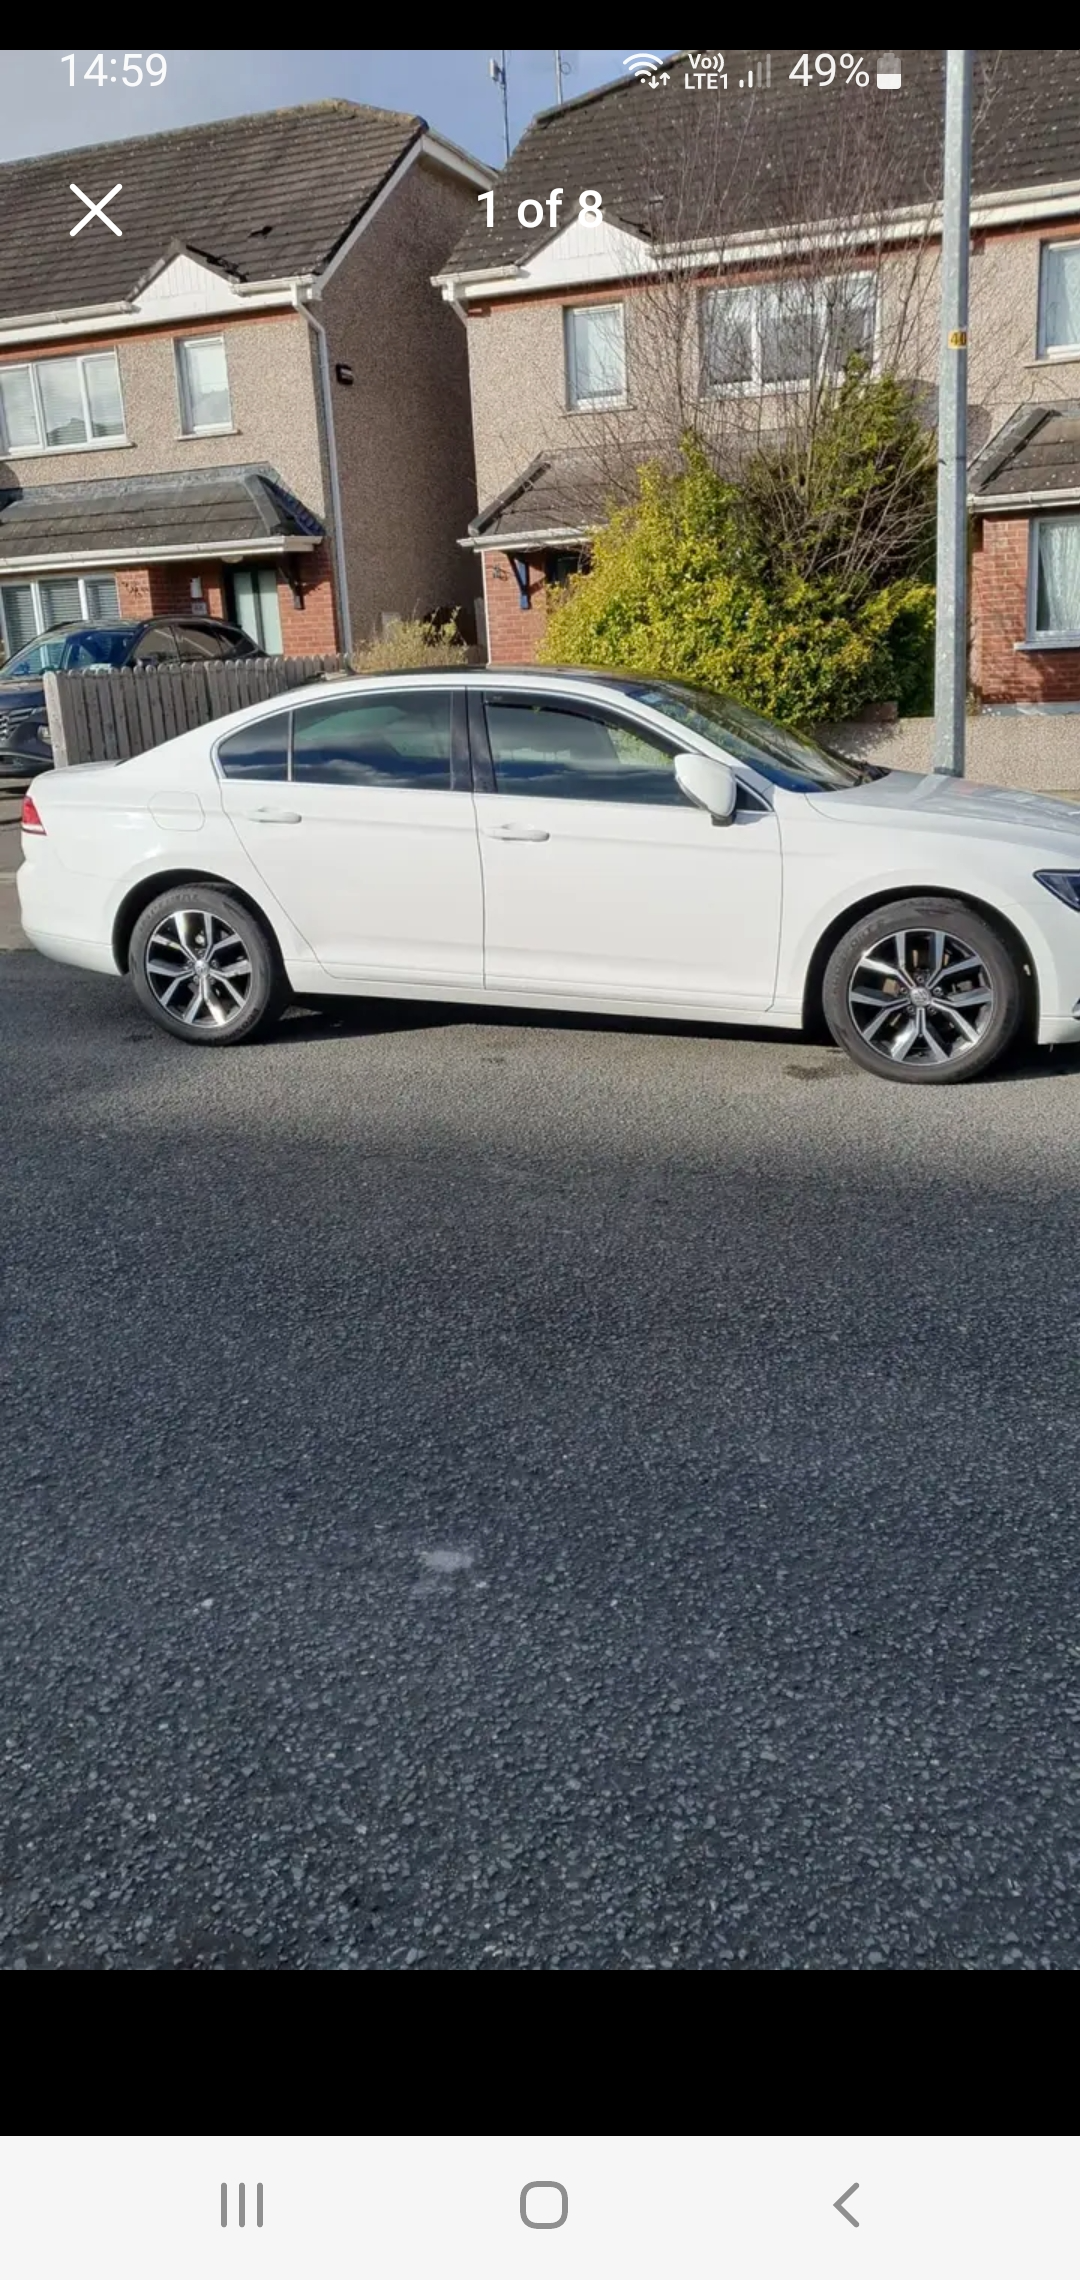 Used Volkswagen Passat 2016 in Louth